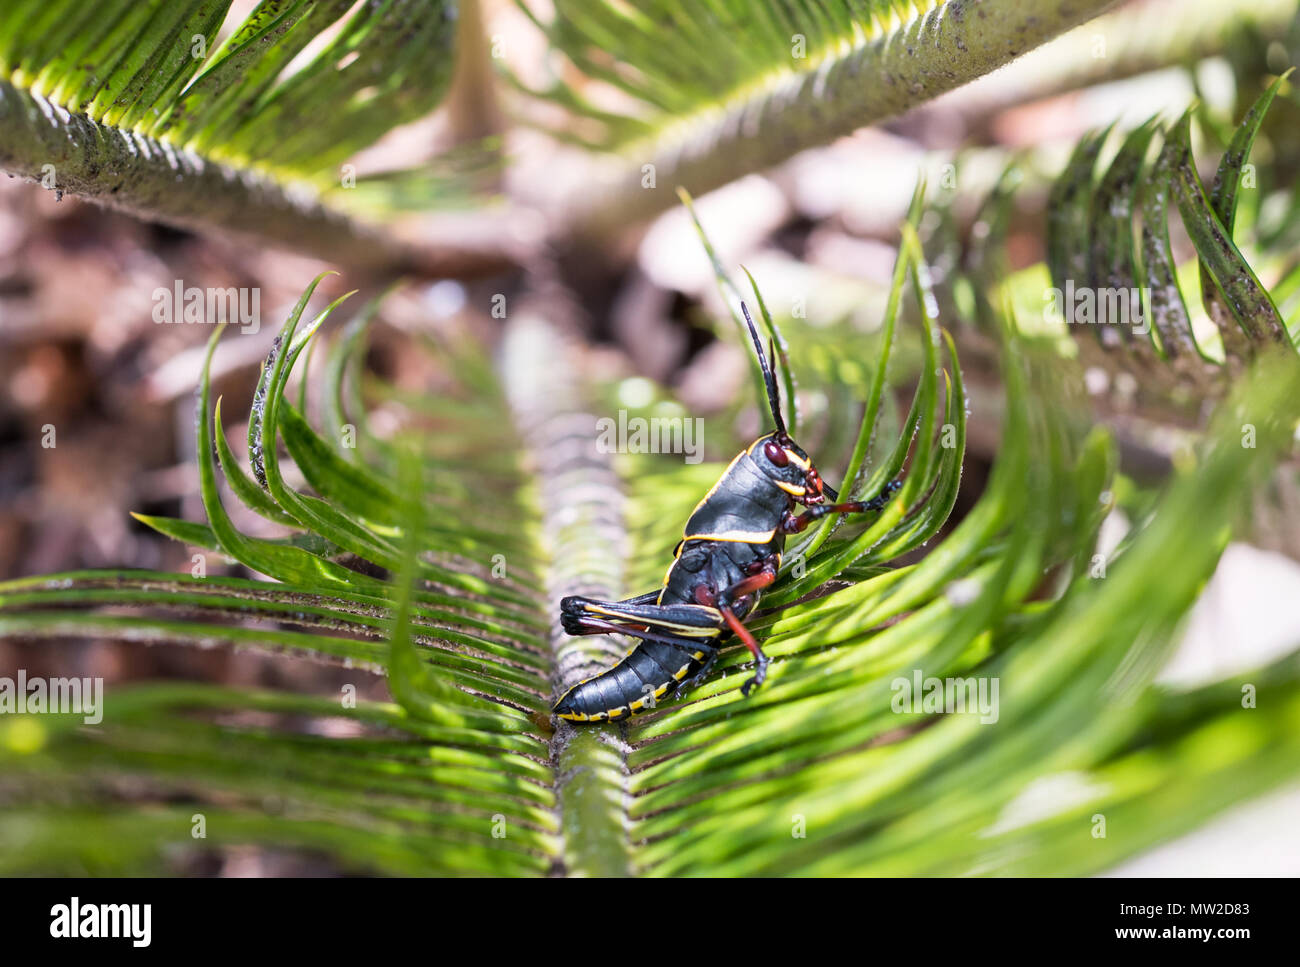 A young Eastern Lubber Grasshopper on the leaves of a Sago Palm tree. Stock Photo